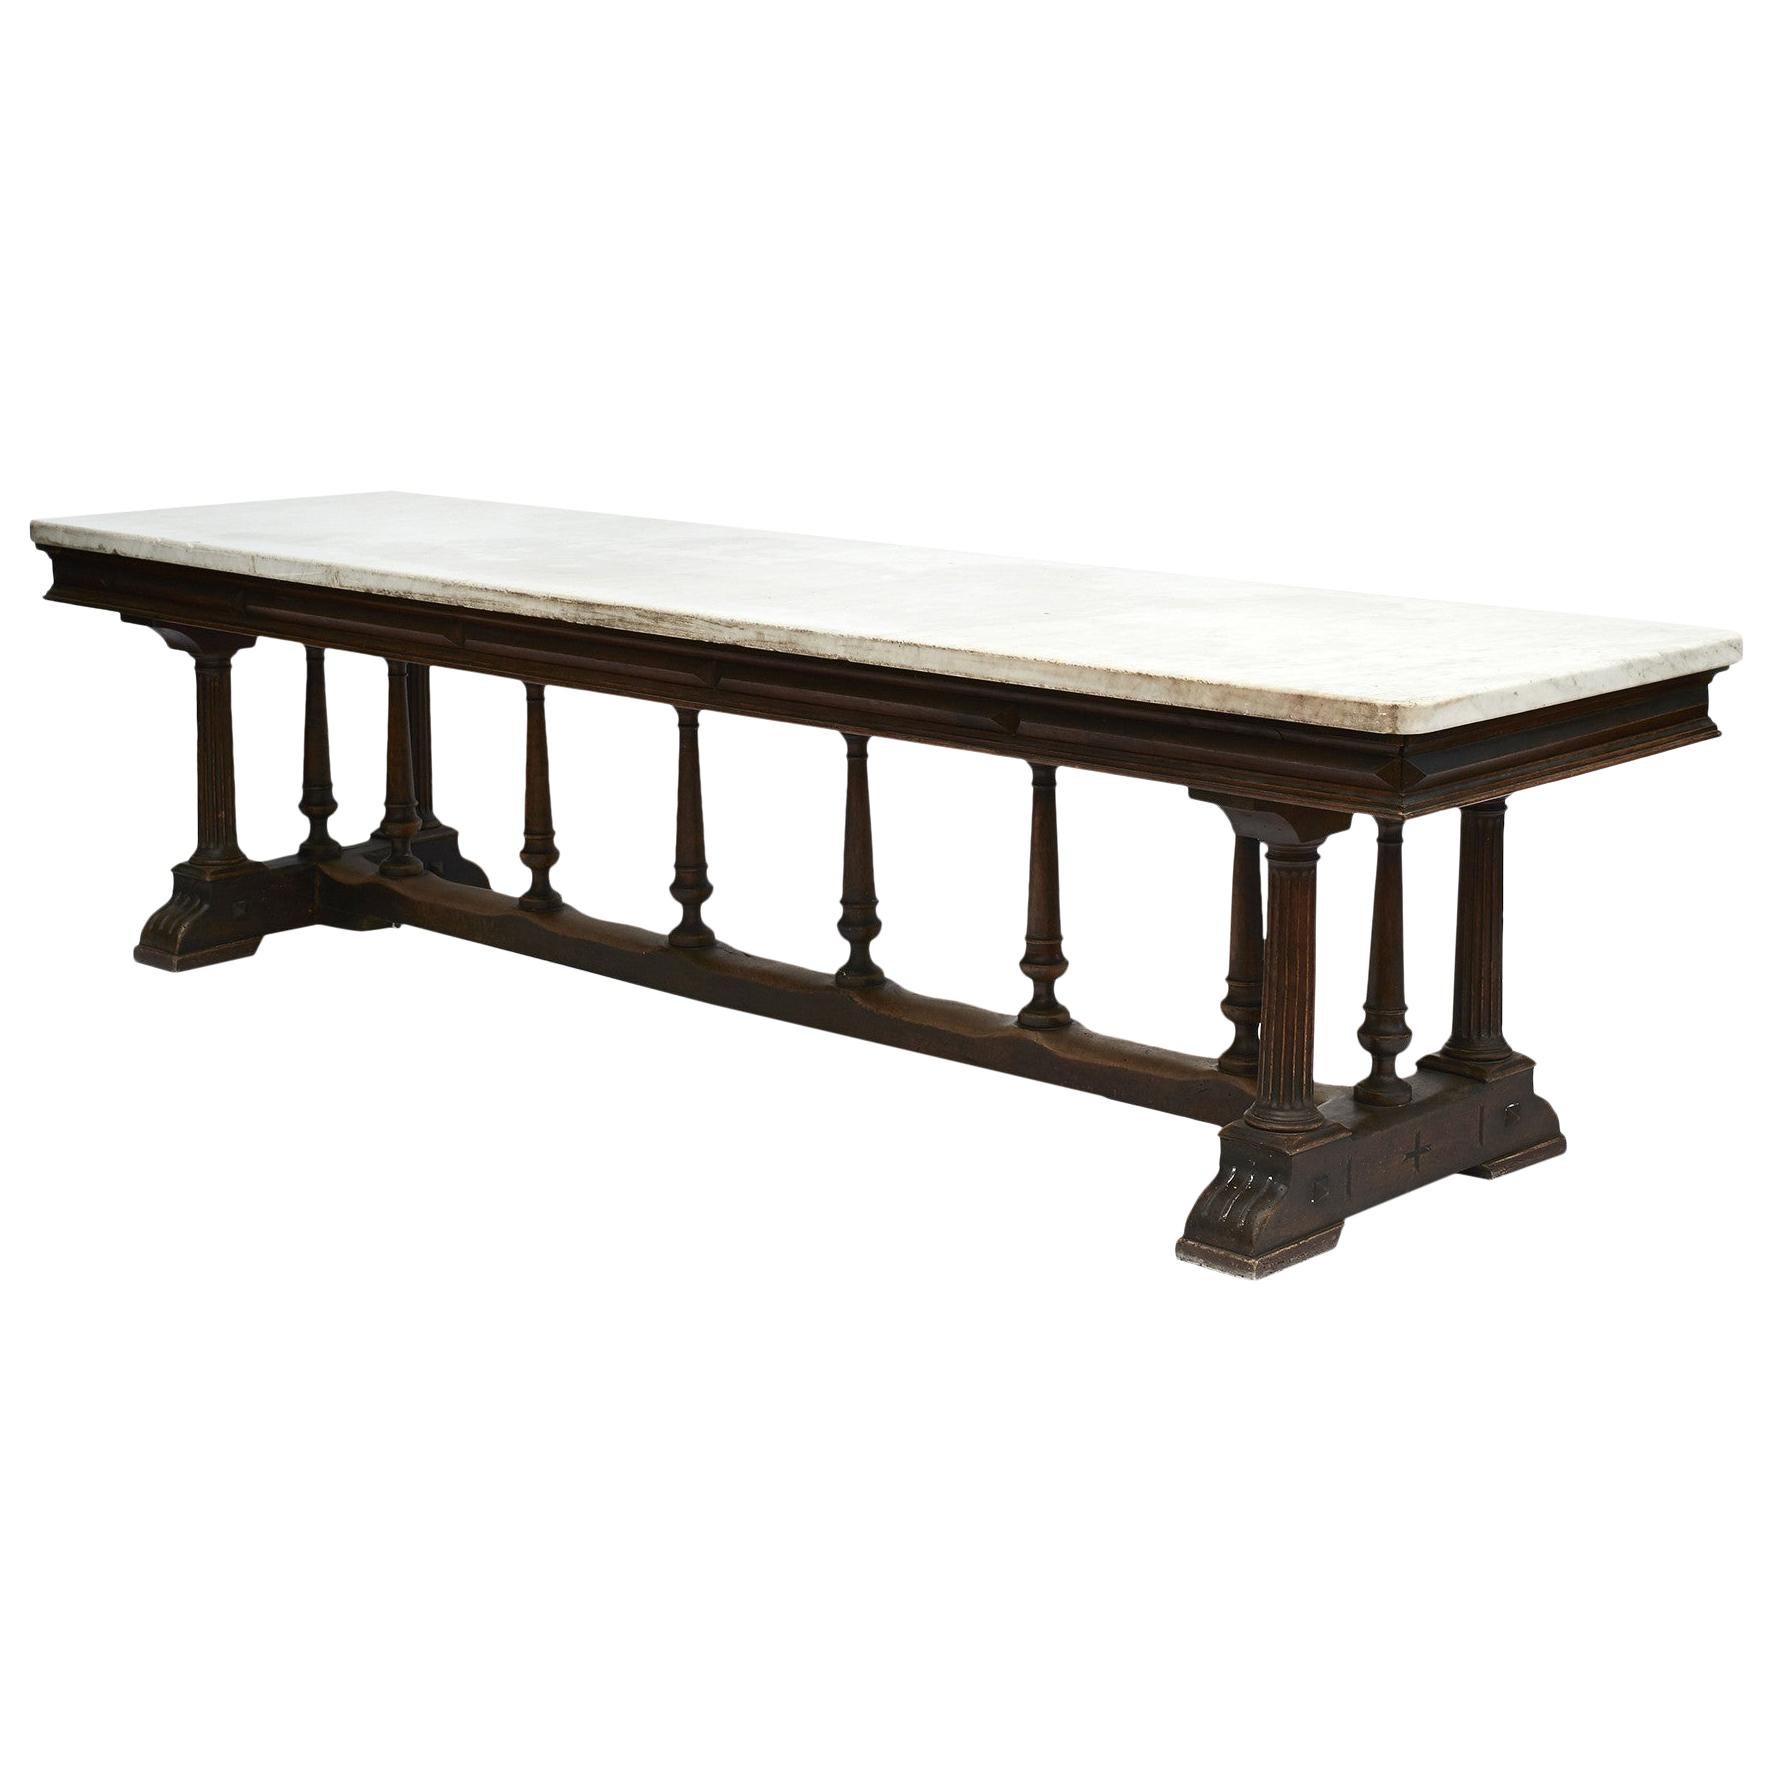 Italian Mid-19th Century Long Dinning Table with White Marble Top